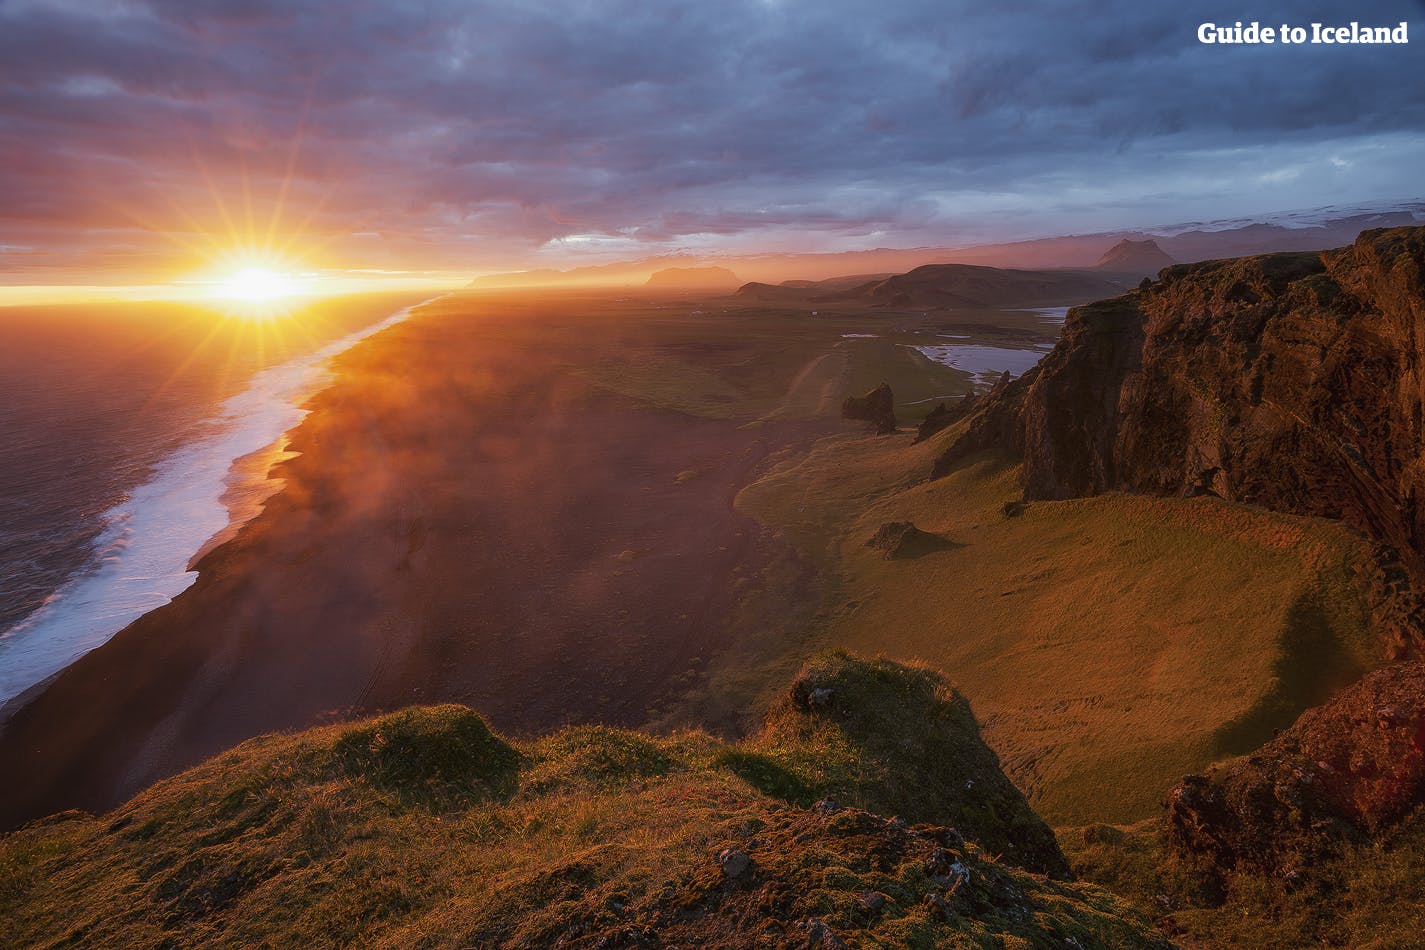 Iceland's south coast, from east to west